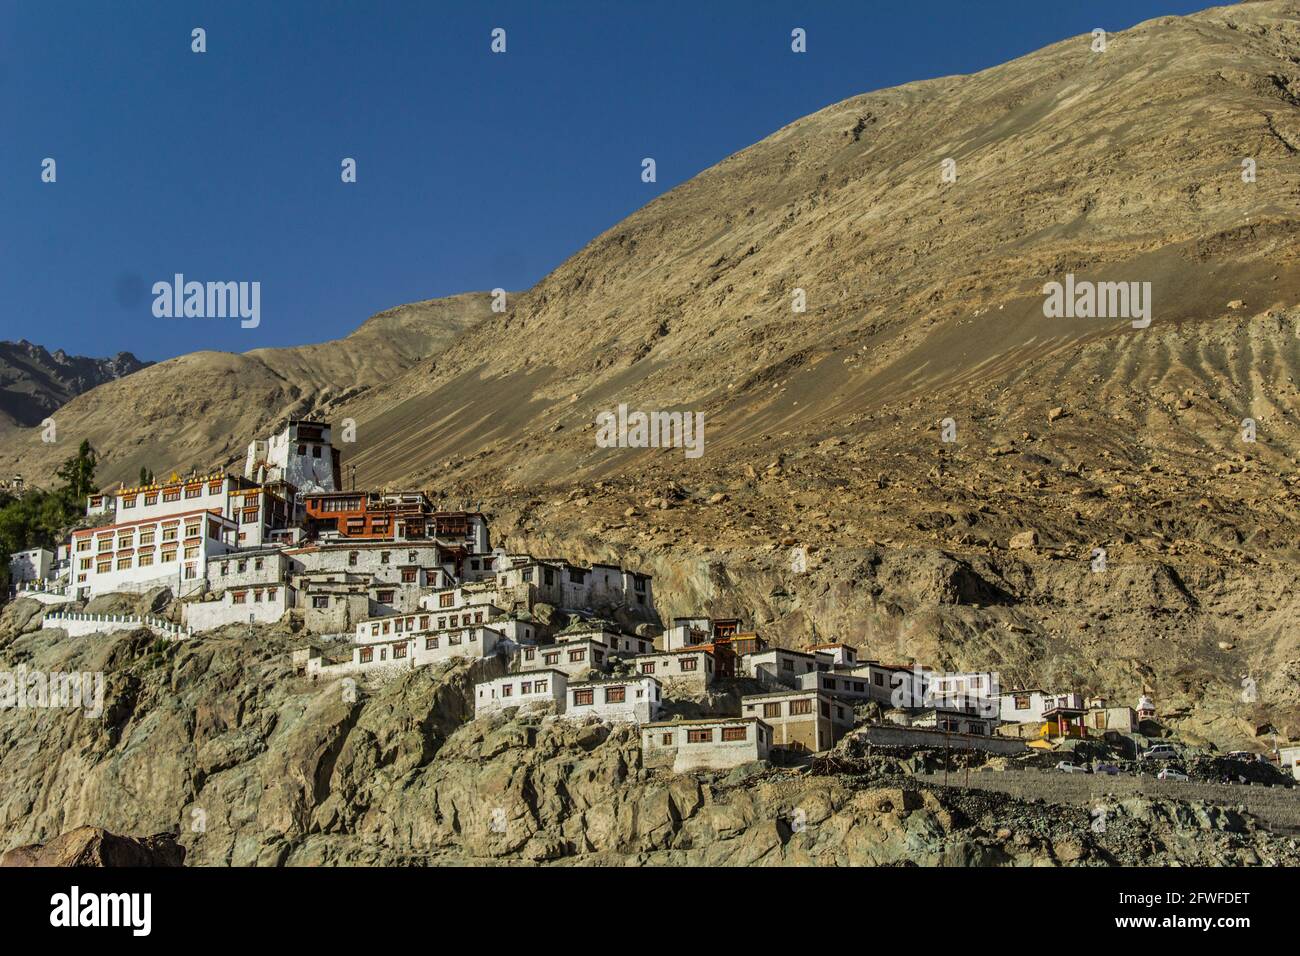 The Diskit Moanstery in Nubra Valley Stock Photo